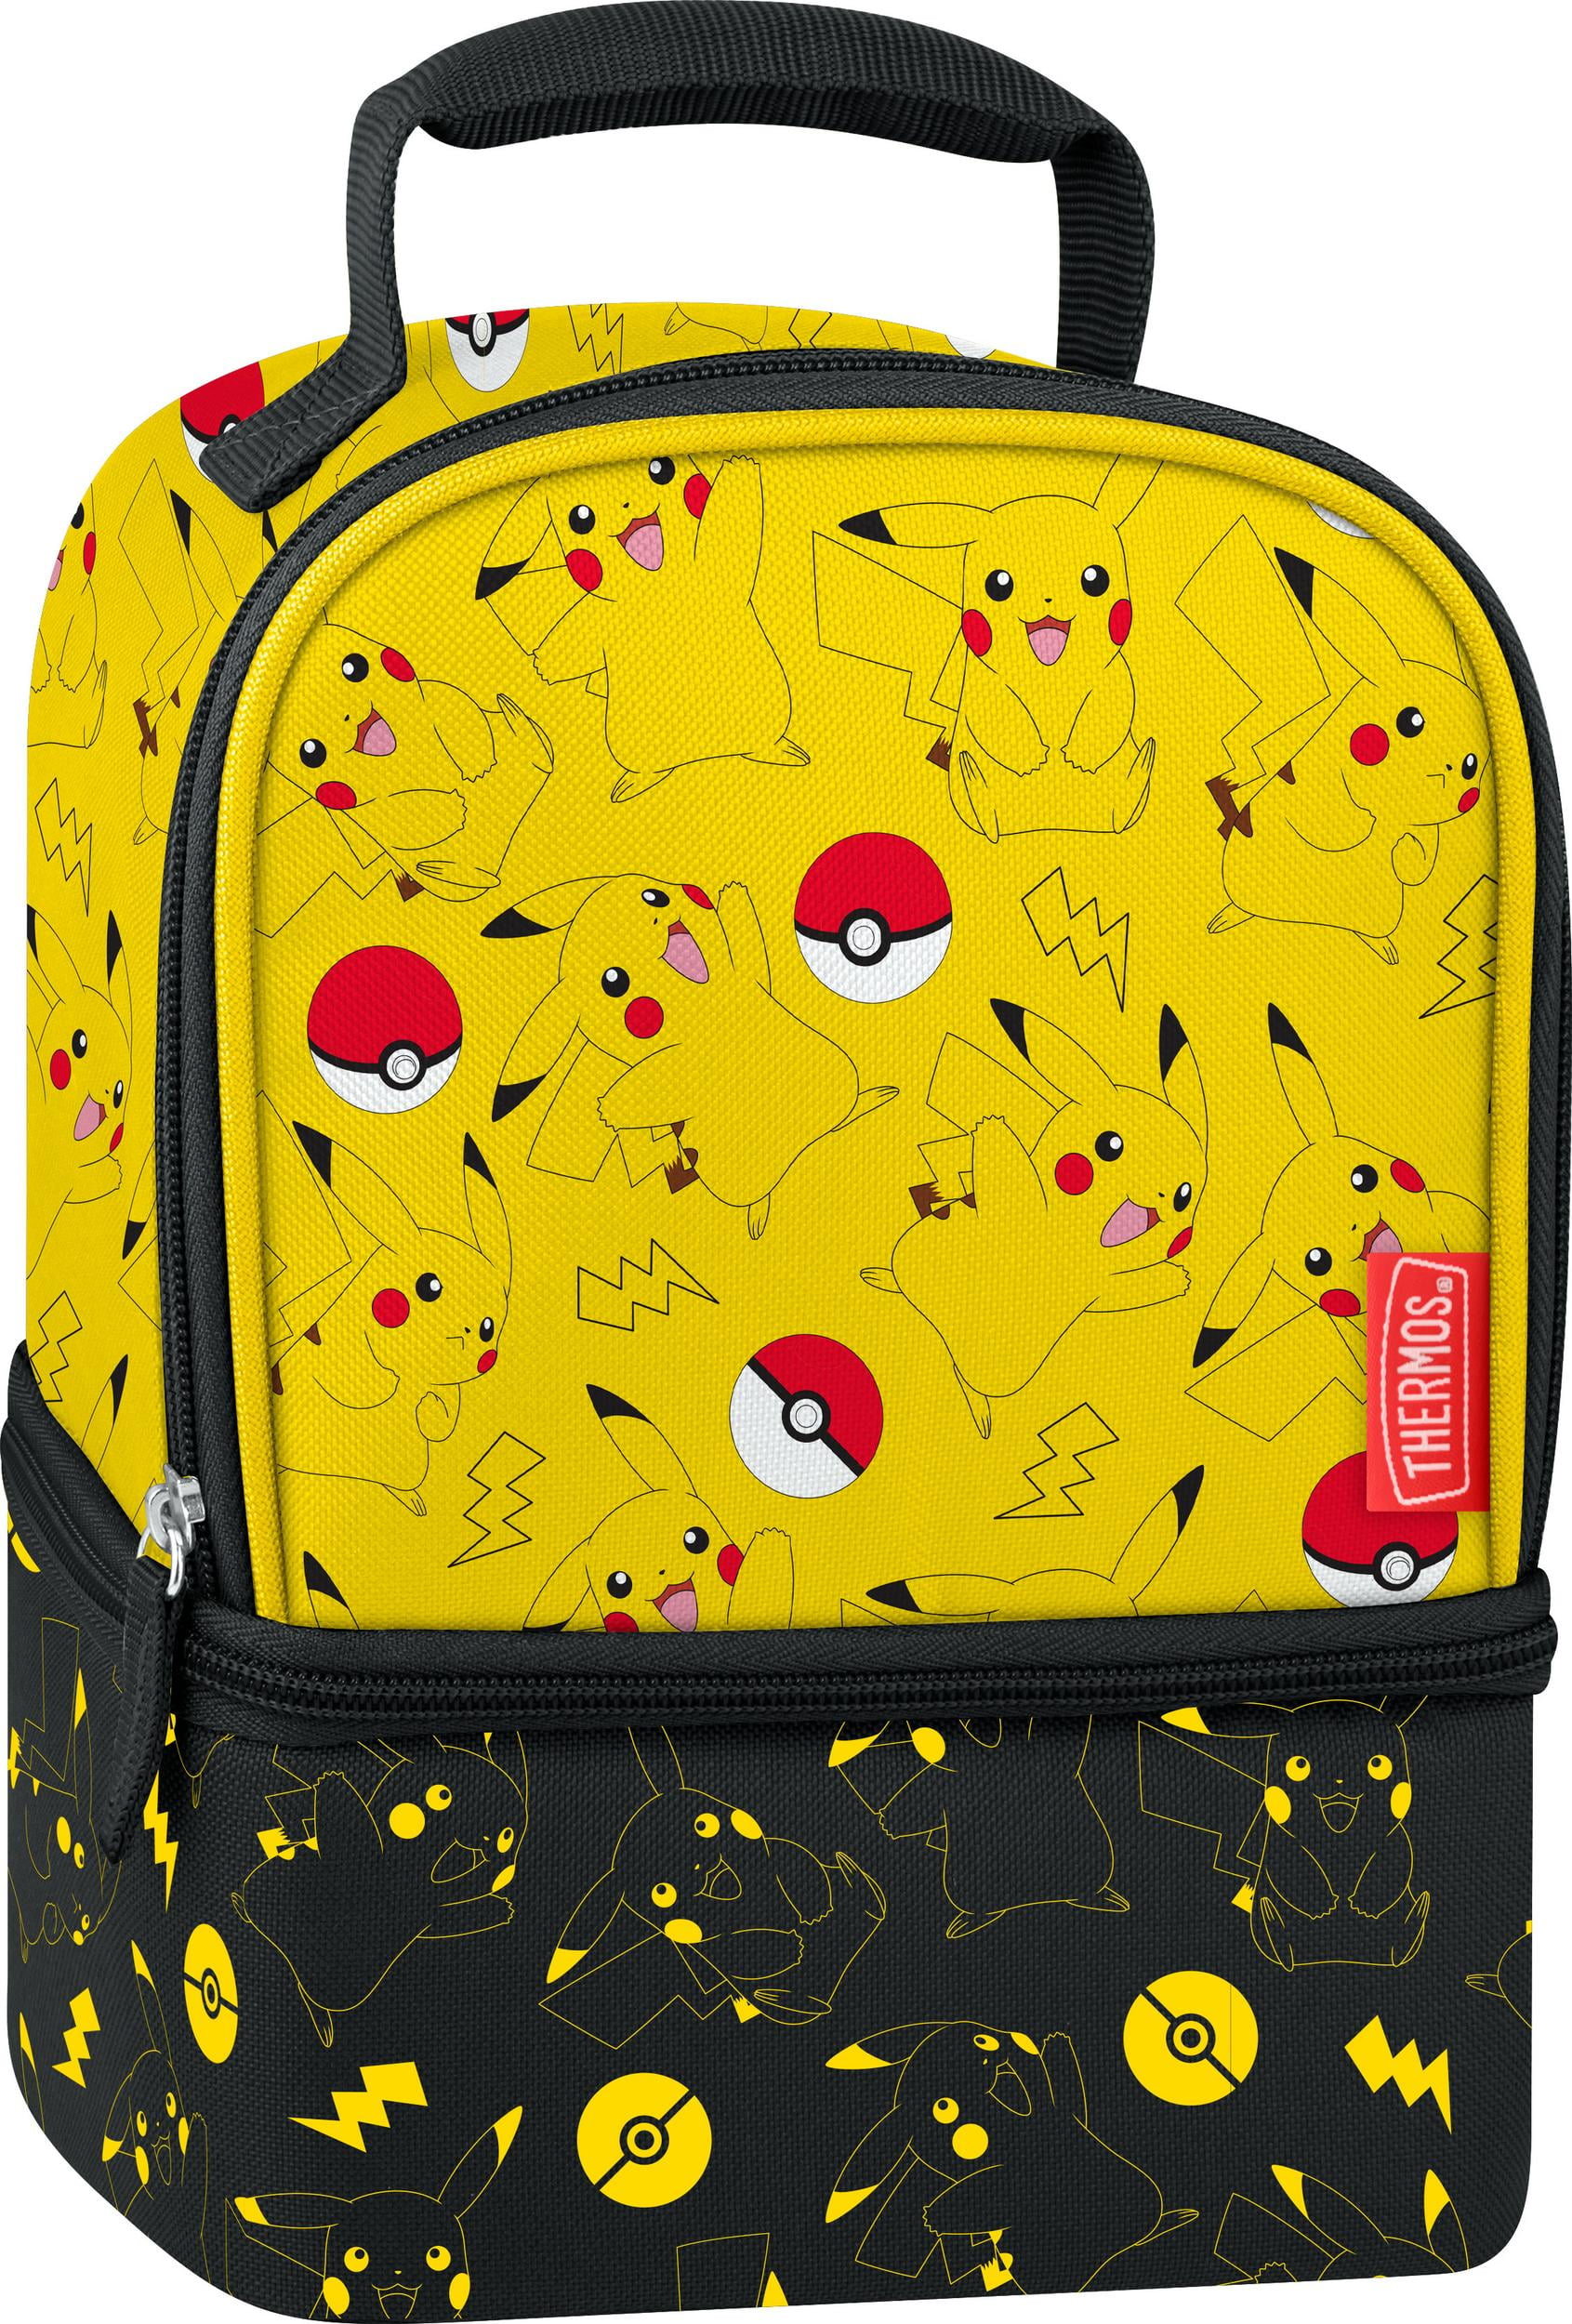 Pokemon Pikachu Thermos Insulated Lunch Box